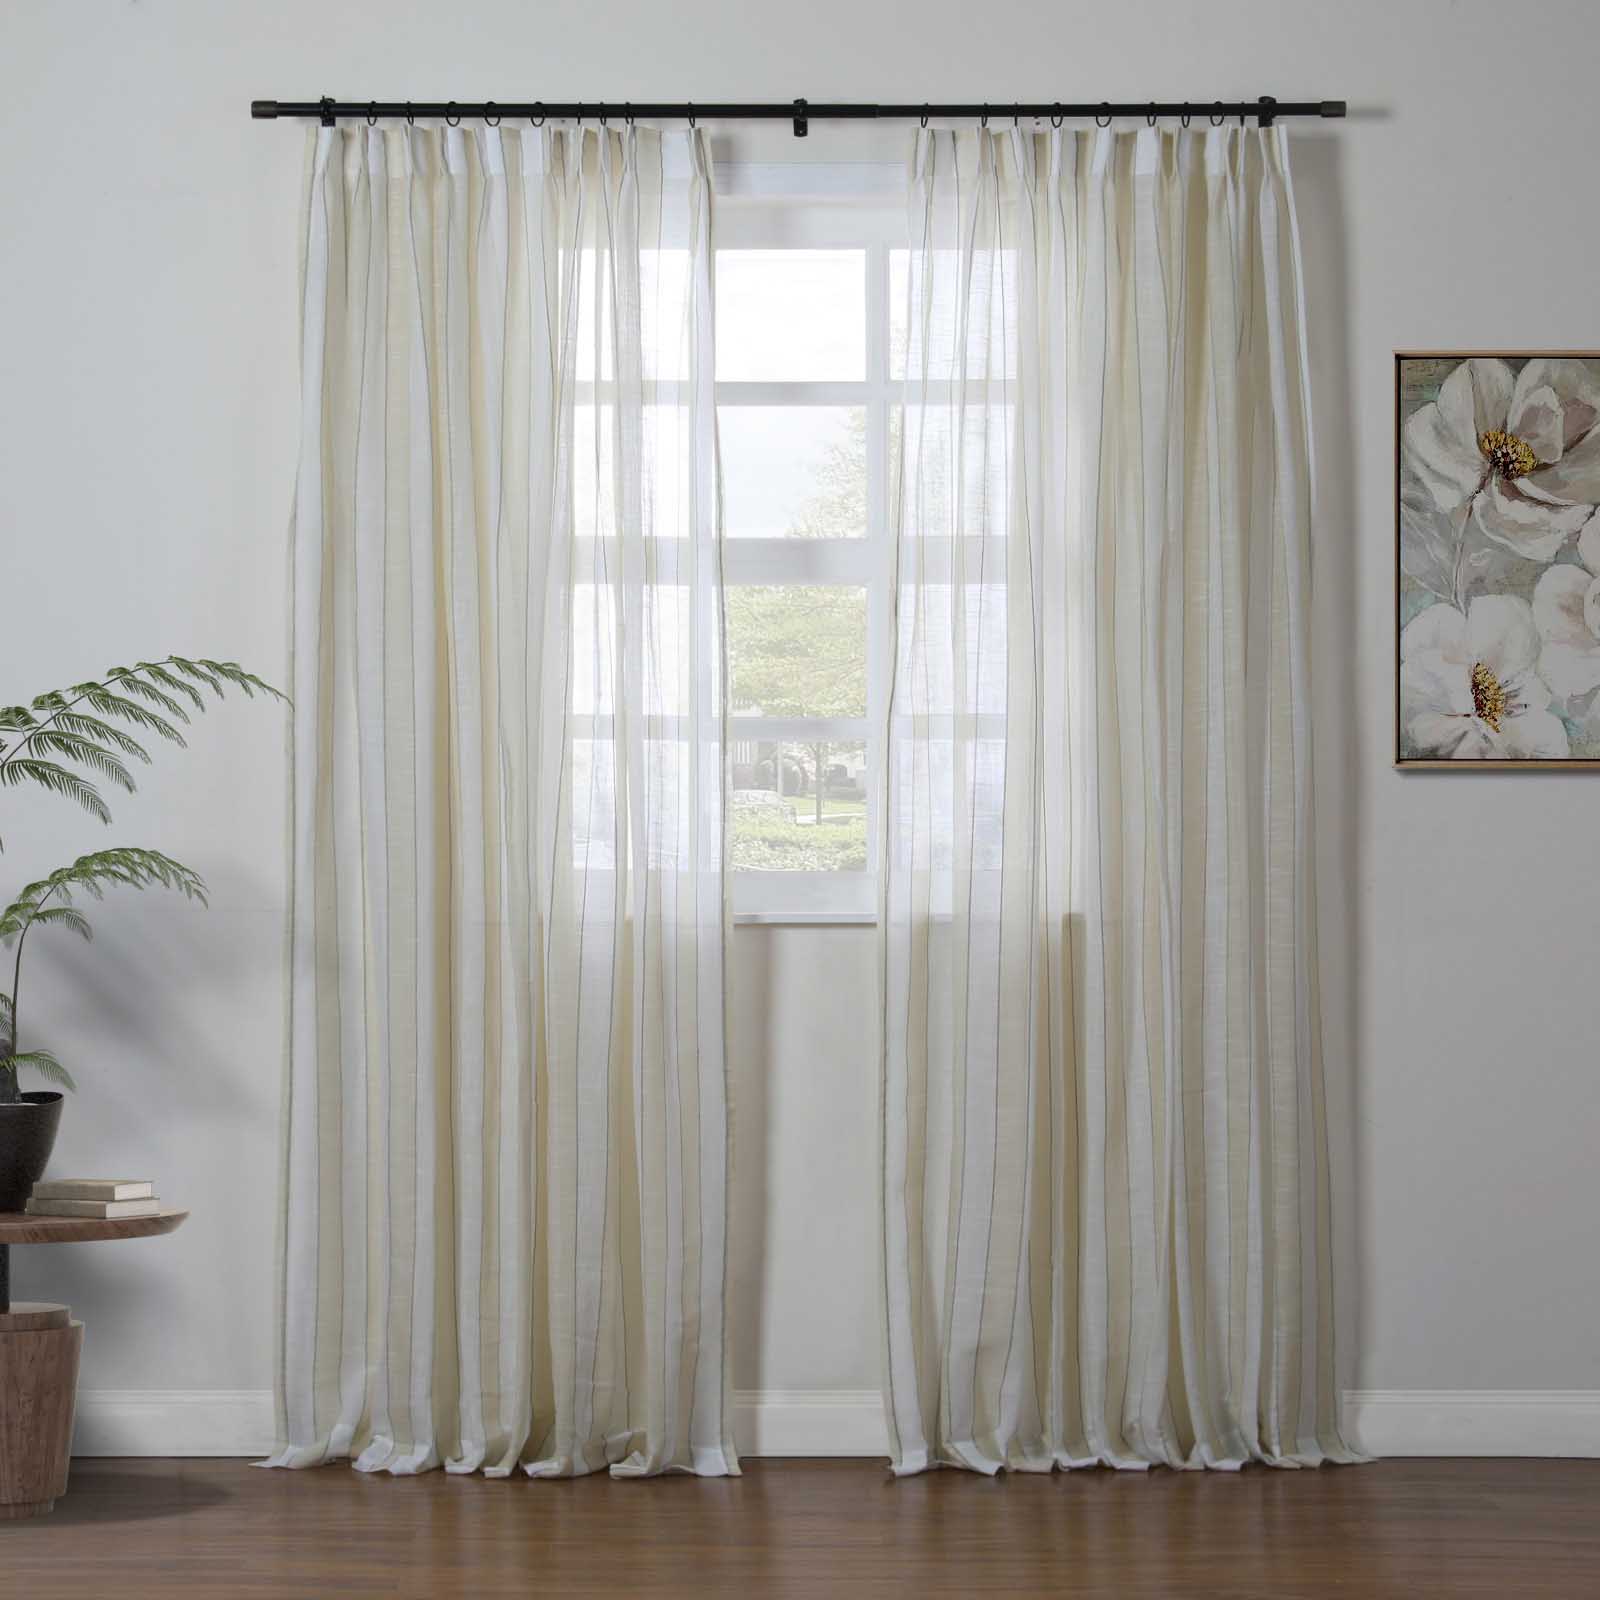 PureEase Woven Striped Sheer Curtain Pleated